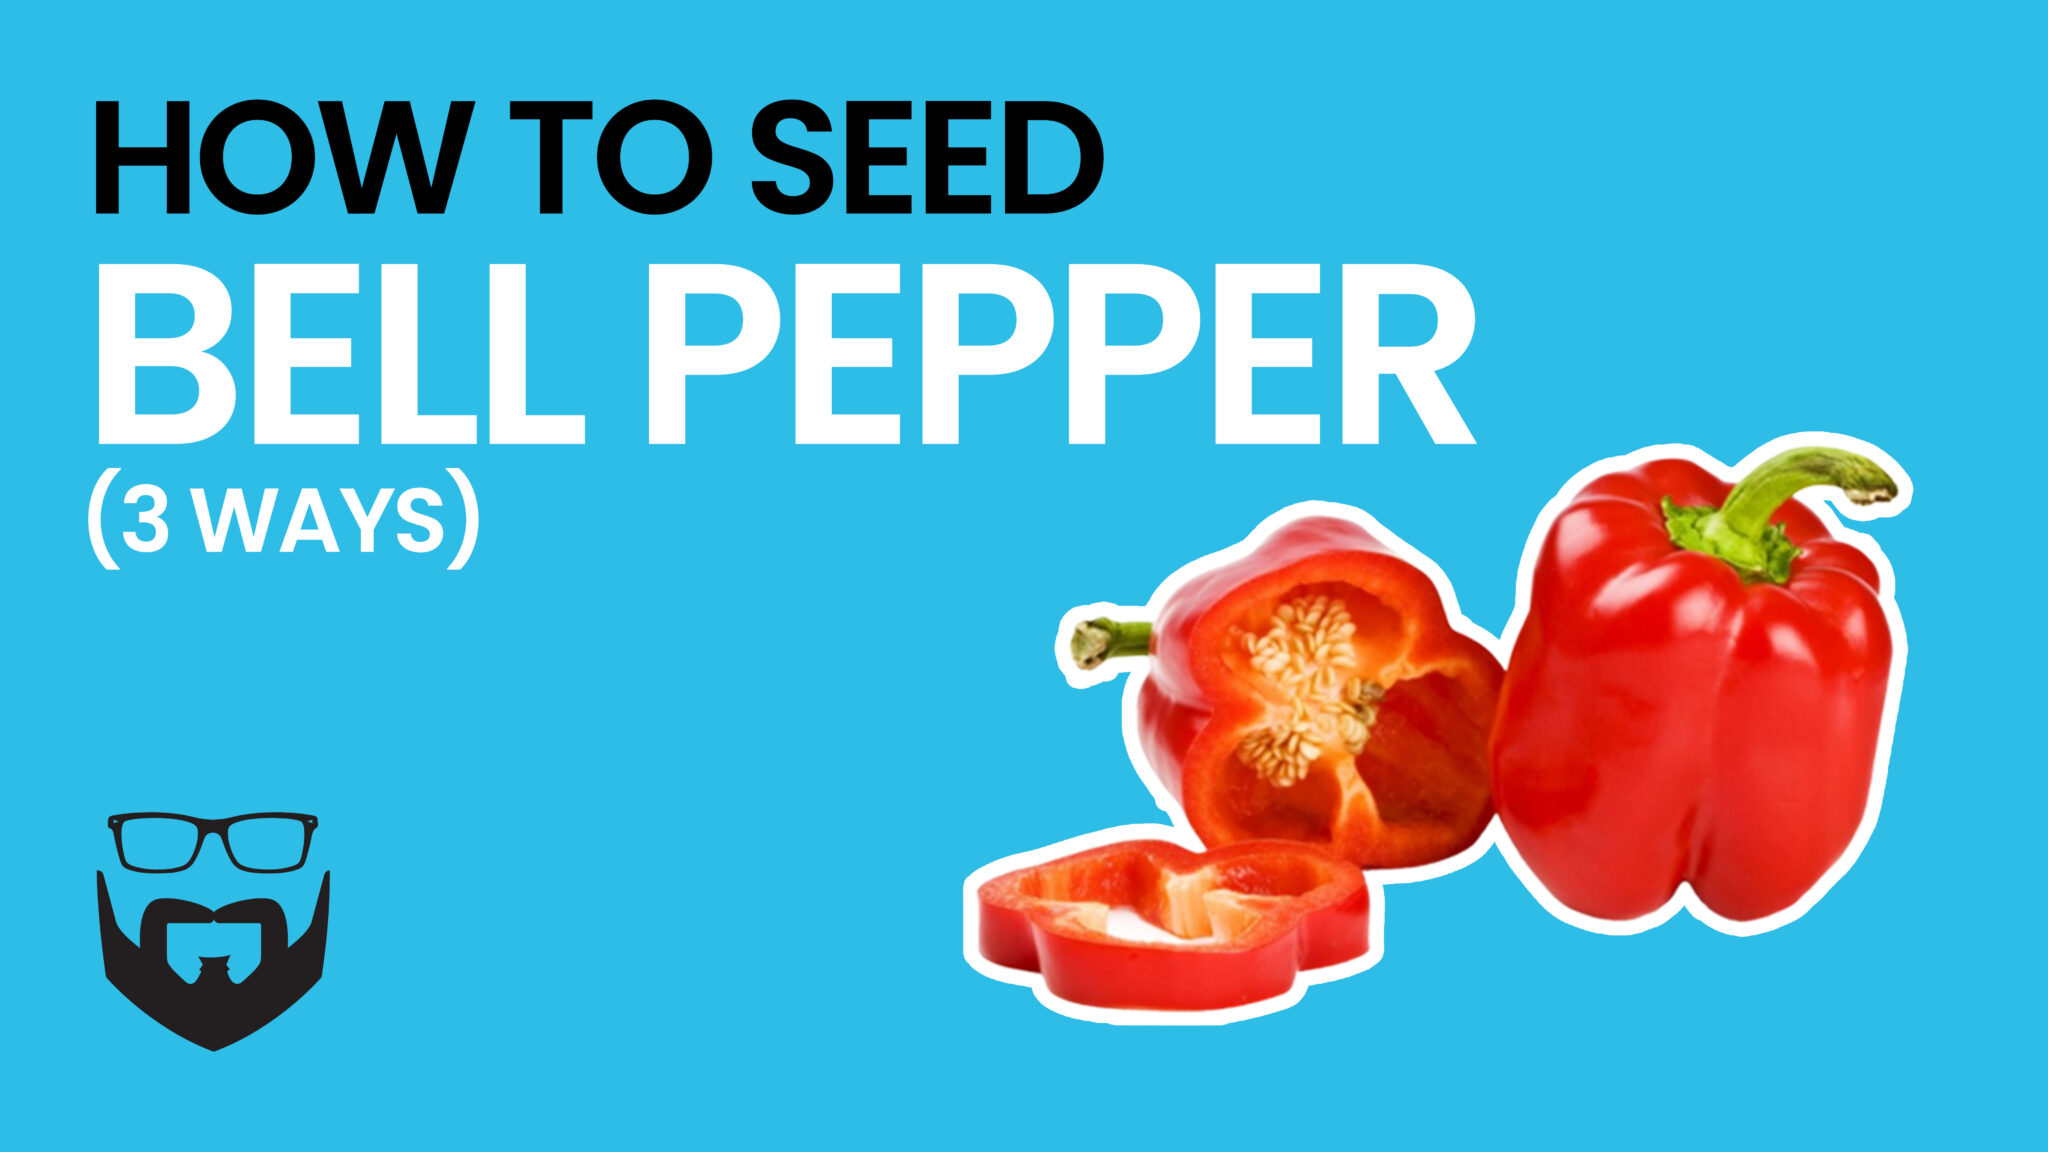 How to Seep a Bell Pepper (3 ways) Video - Blue